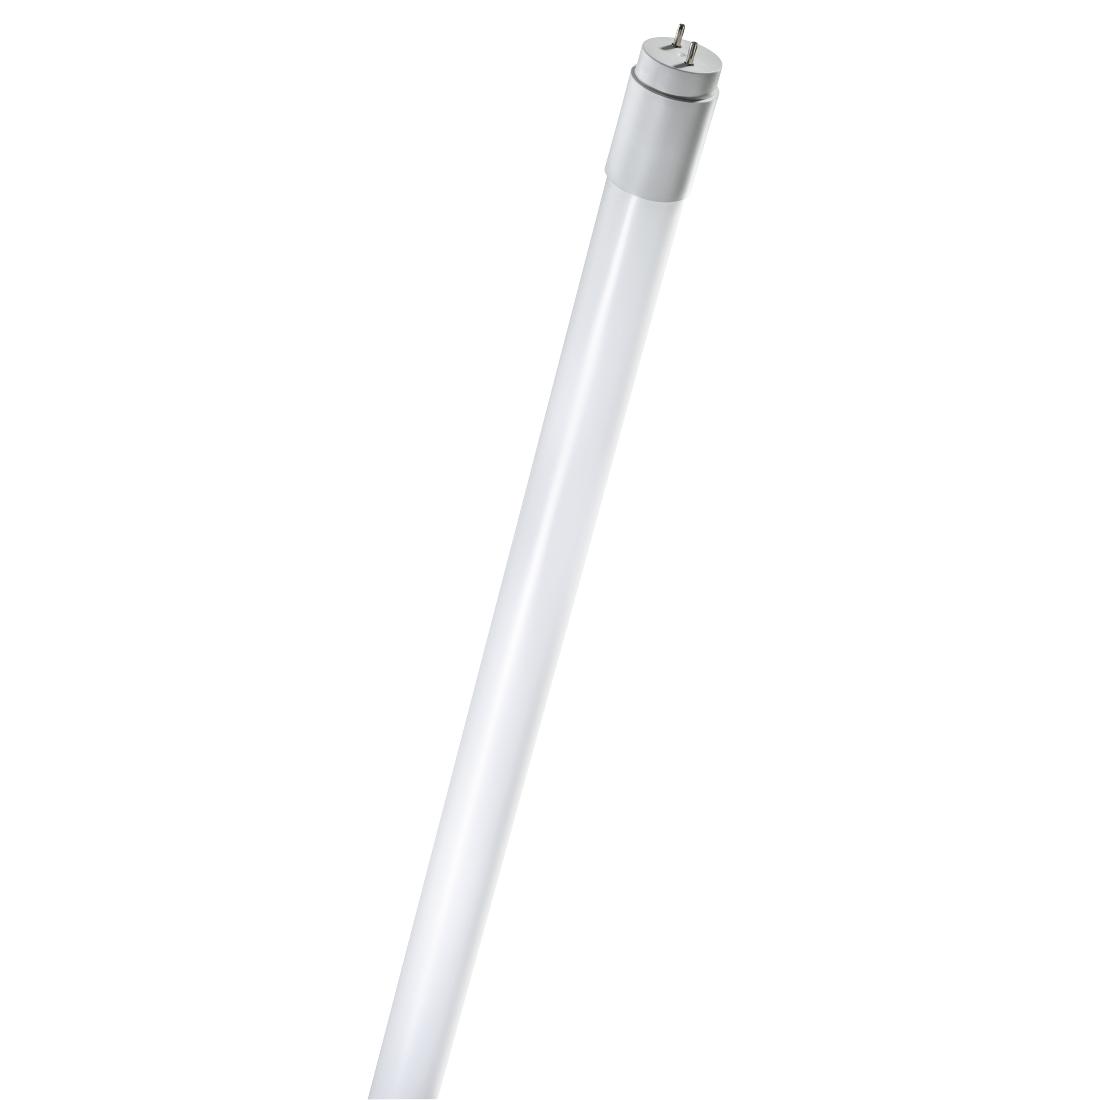 abx High-Res Image - Xavax, LED Bulb, G13, 1800 lm Replaces 18 W, Tube T8, 60 cm, neutral white, Glass